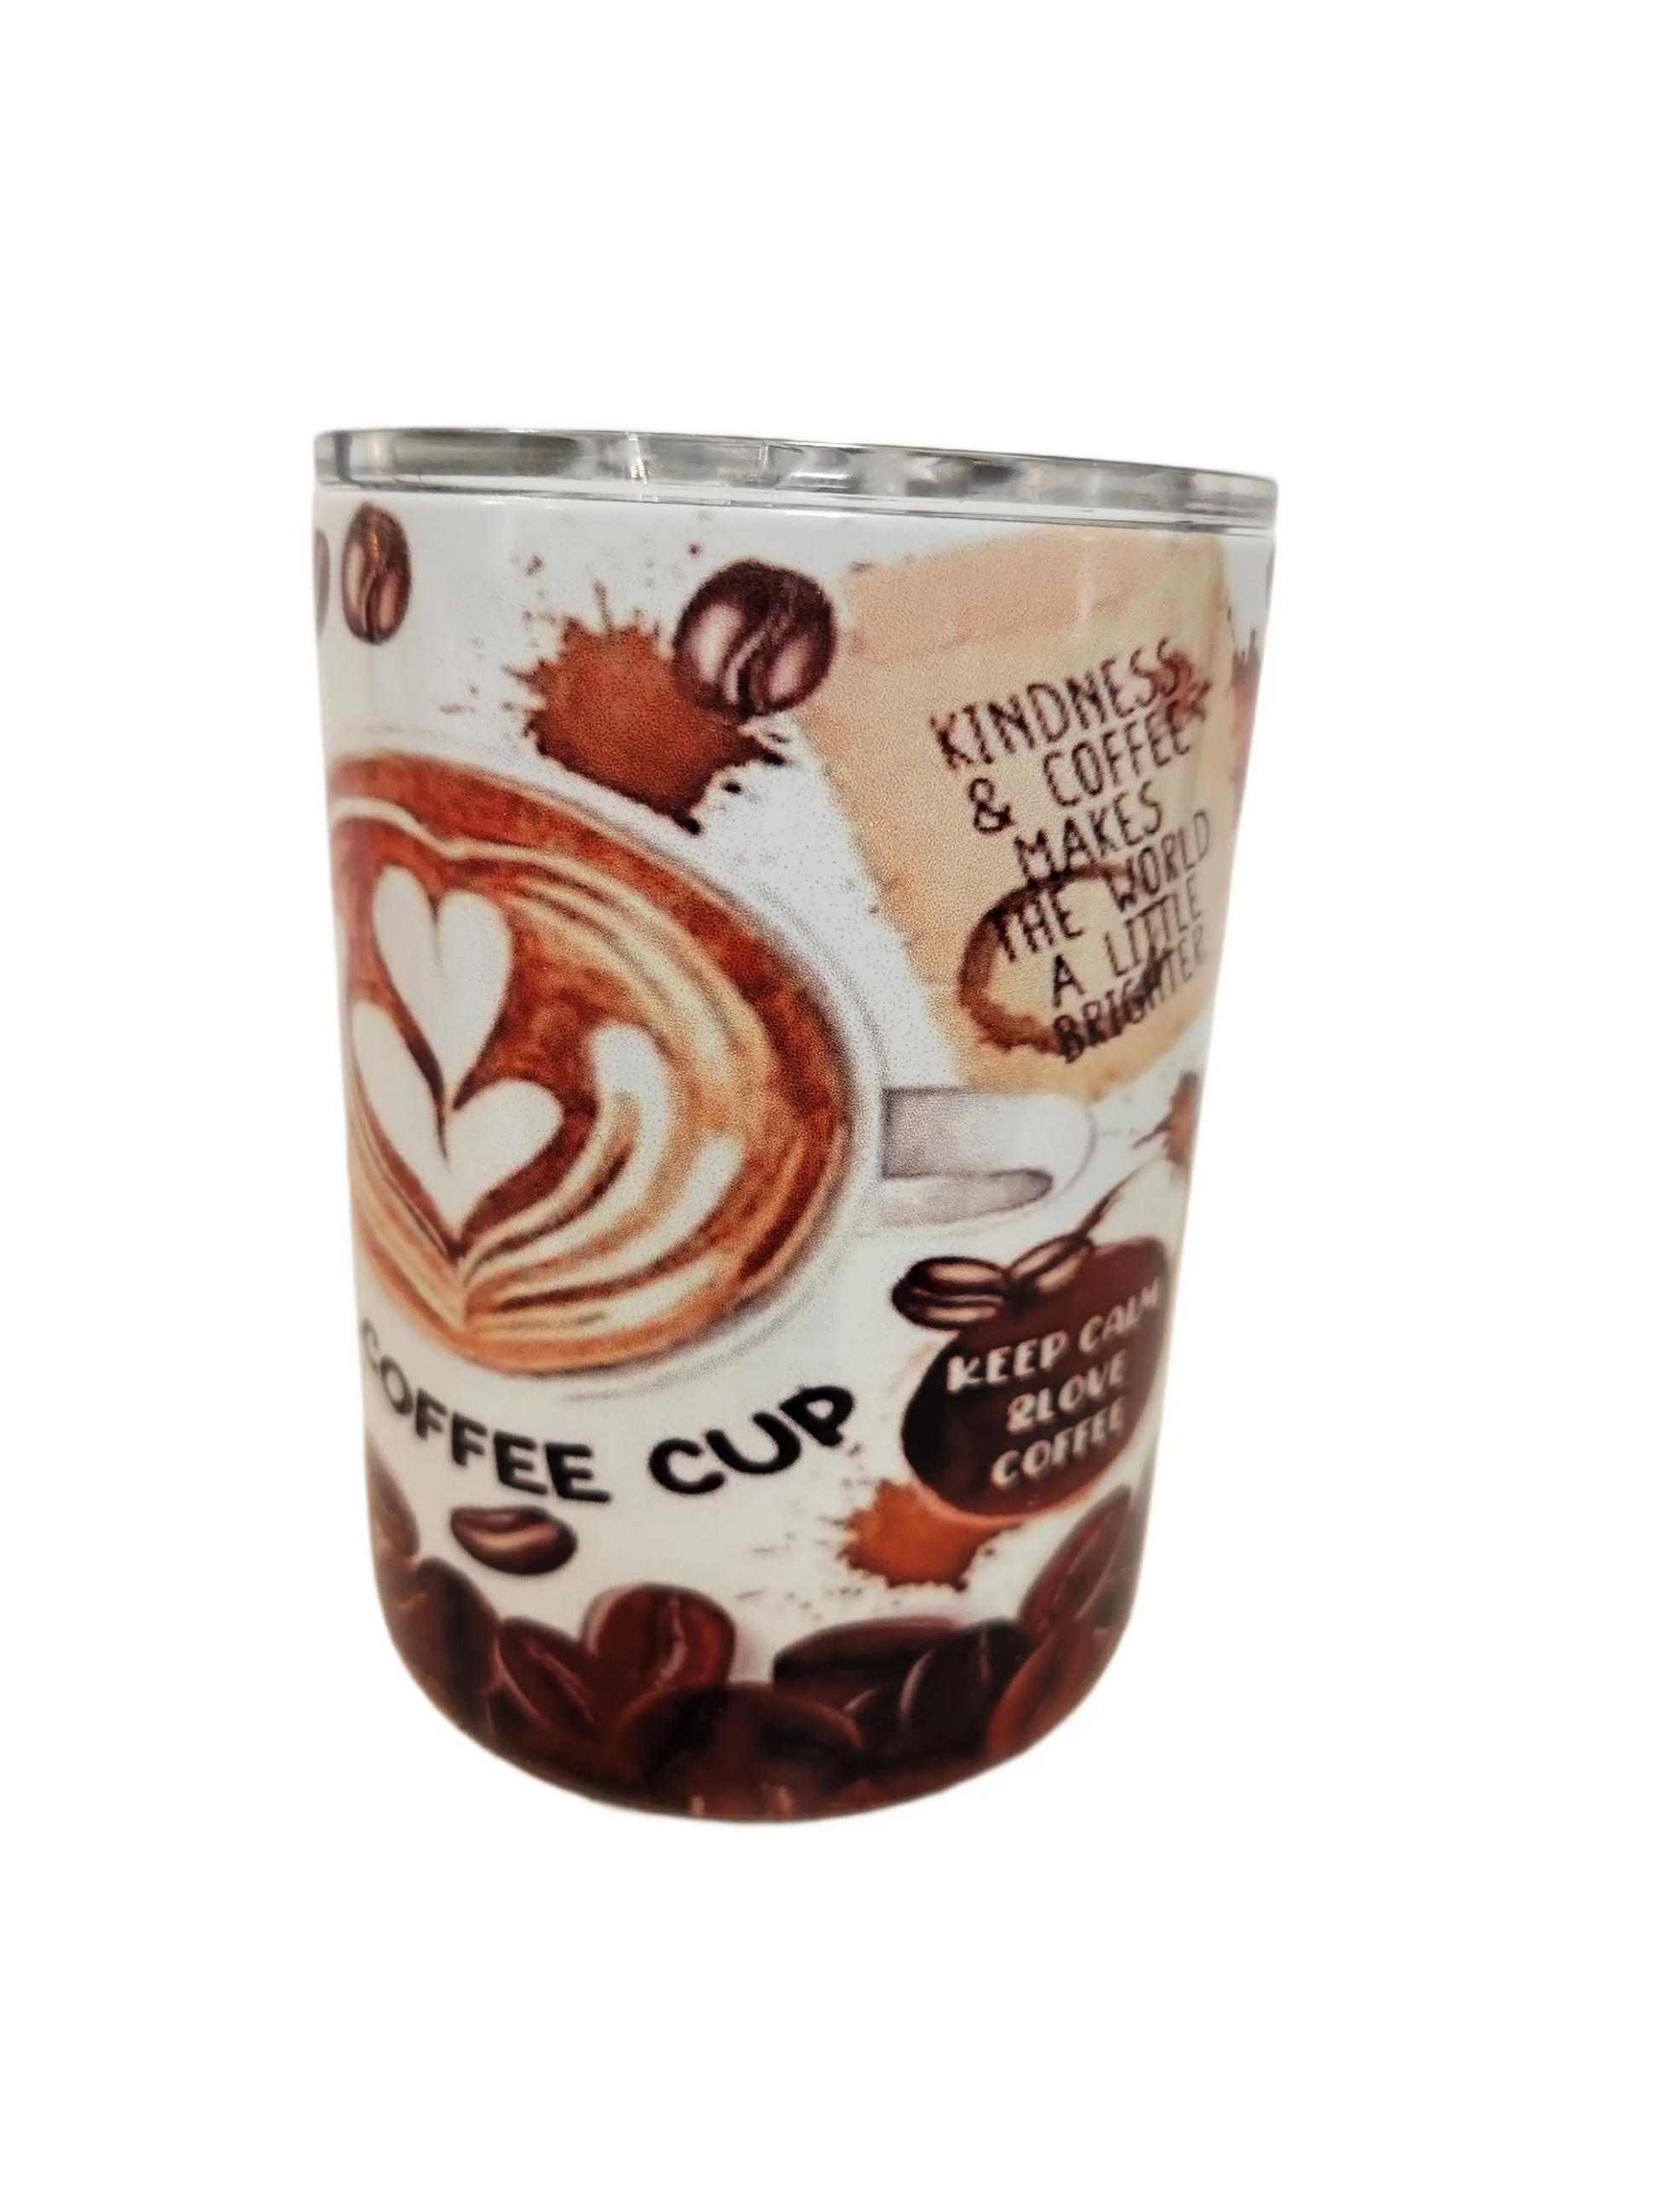 Today, I will drink coffee and smile 10oz coffee tumblers - Image #3